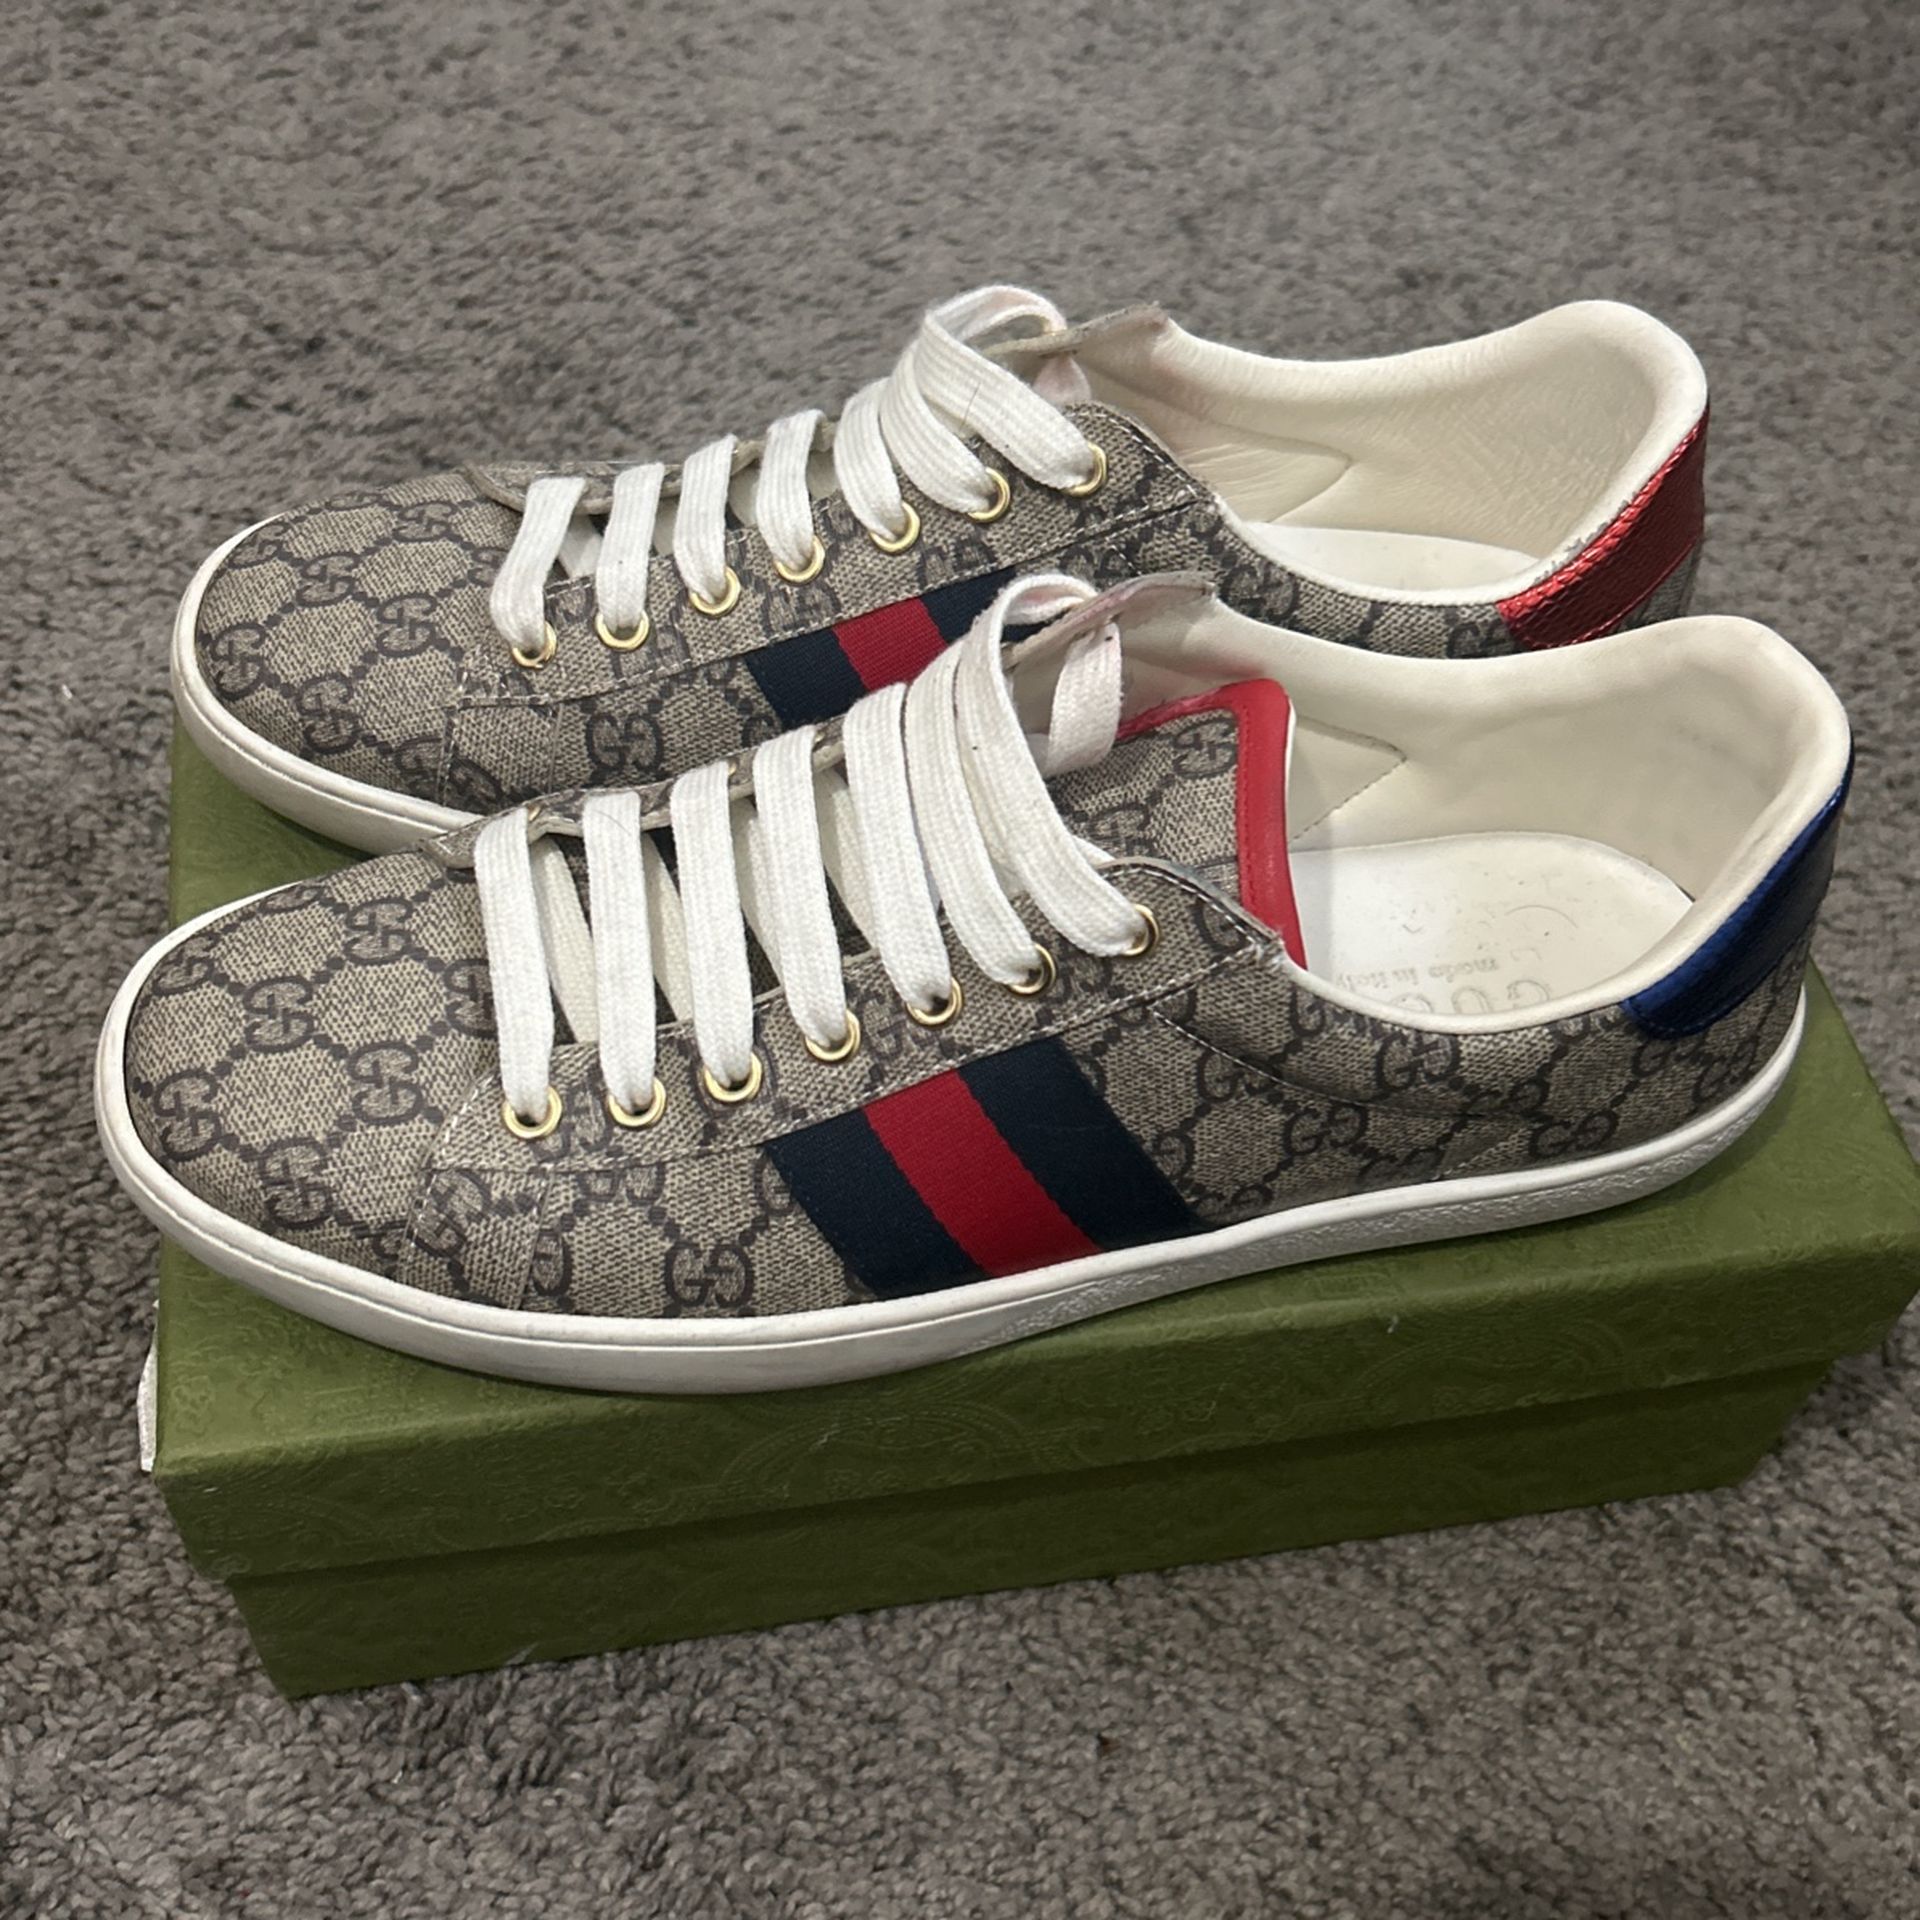 Gucci Ace Shoes PRICE IS NEGOTIABLE 